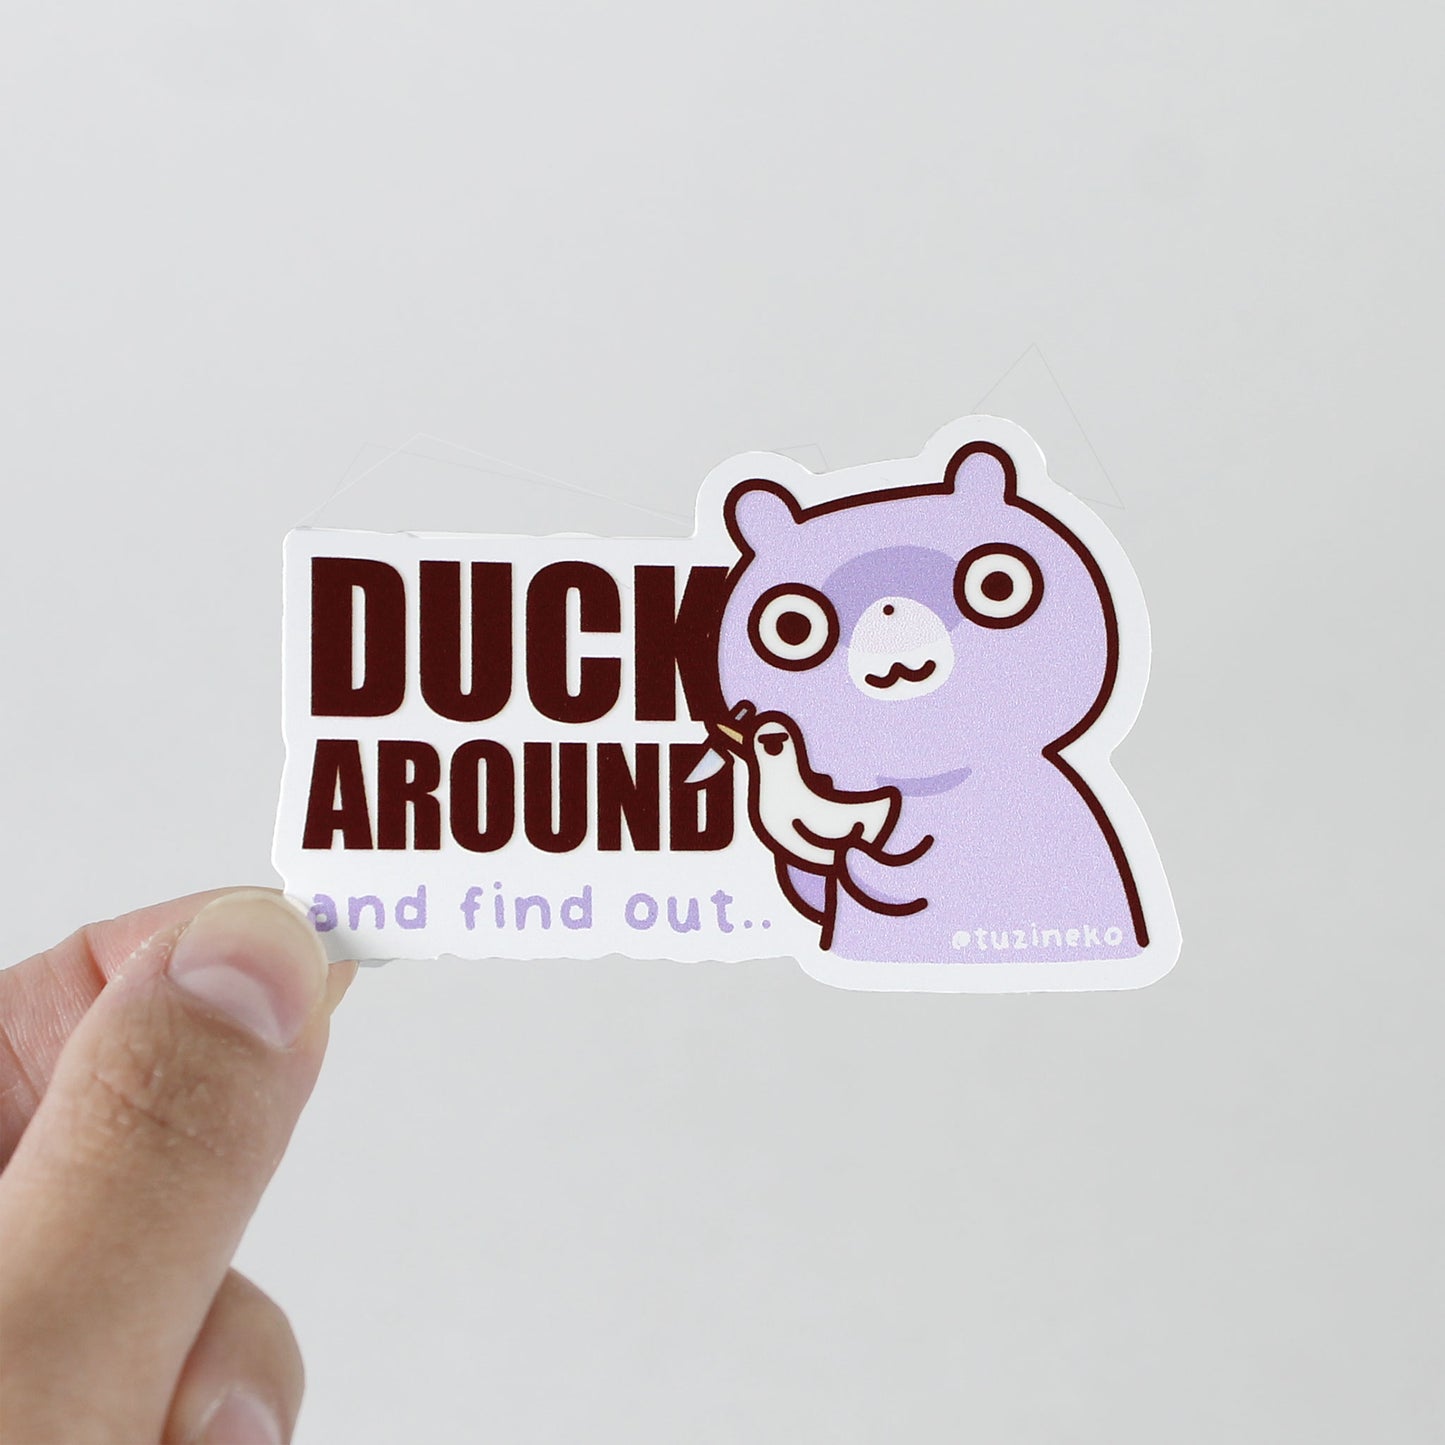 Scary Gom "Duck Around And Find Out" Matte Waterproof Sticker with Gloss Spot UV